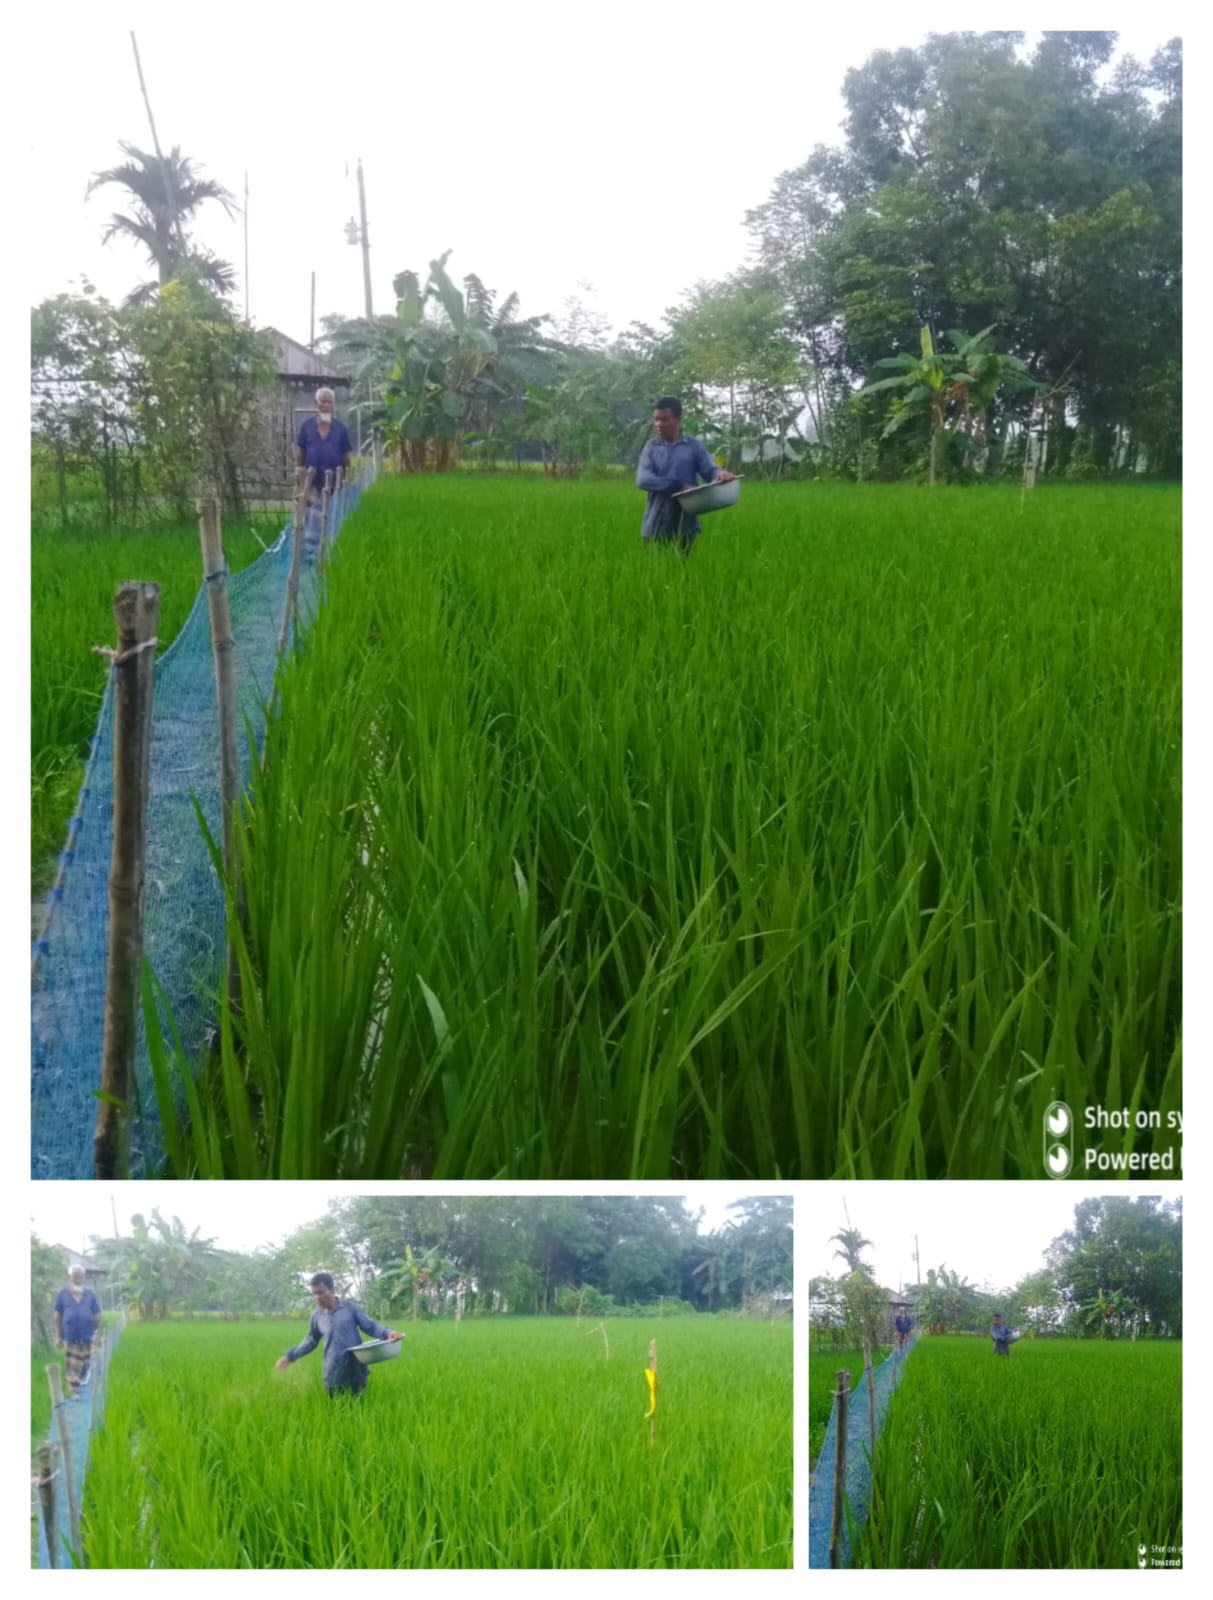 AERI started the BRRI dhan75 cultivation and seed business at the farmer level